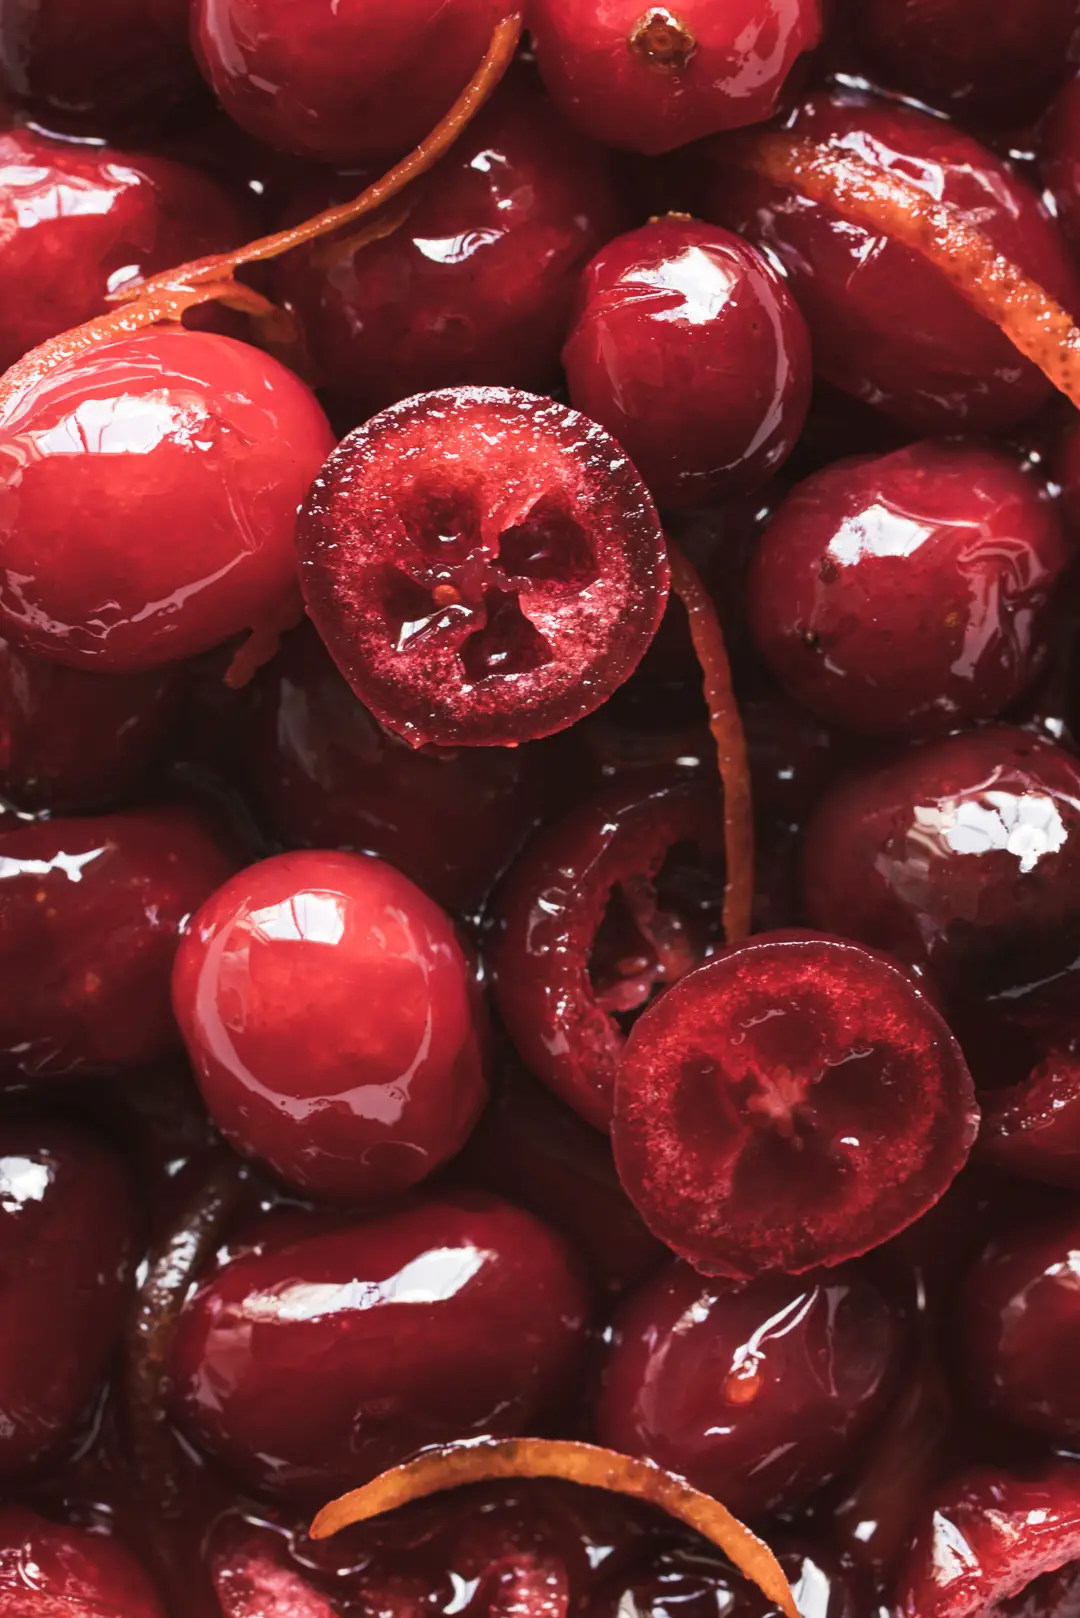 These soft candied cranberries are the most beautiful and delicious preparation of whole cranberries - a gorgeous & festive garnish